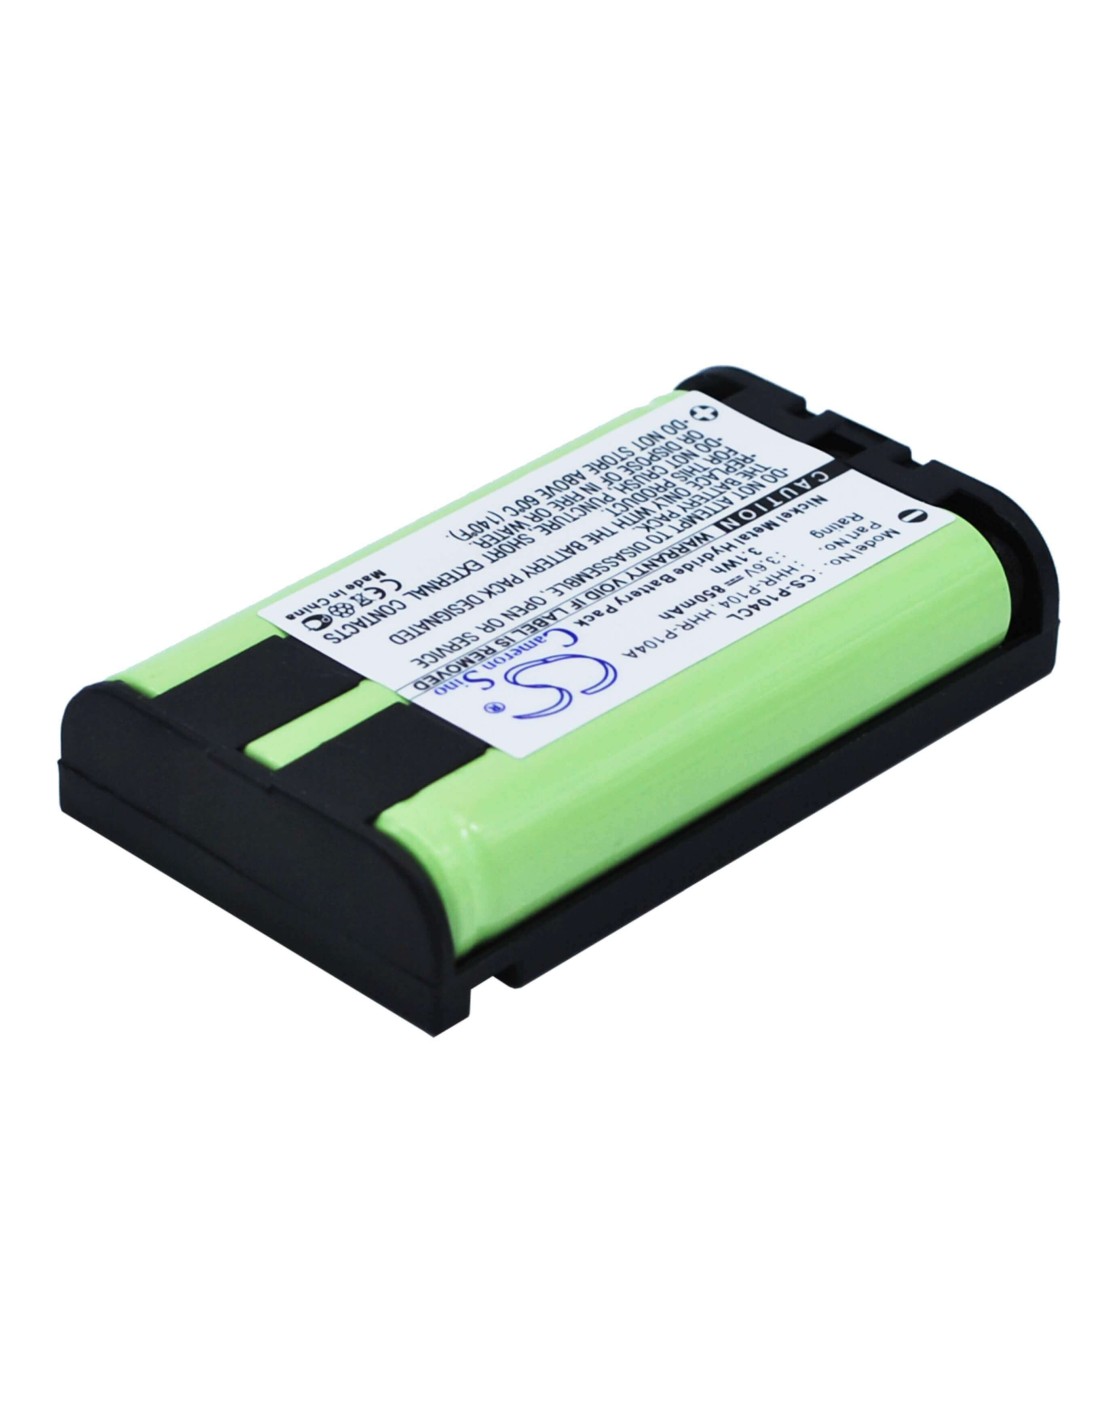 Battery for Gp, Gp85aaalh3bxz 3.6V, 850mAh - 3.06Wh